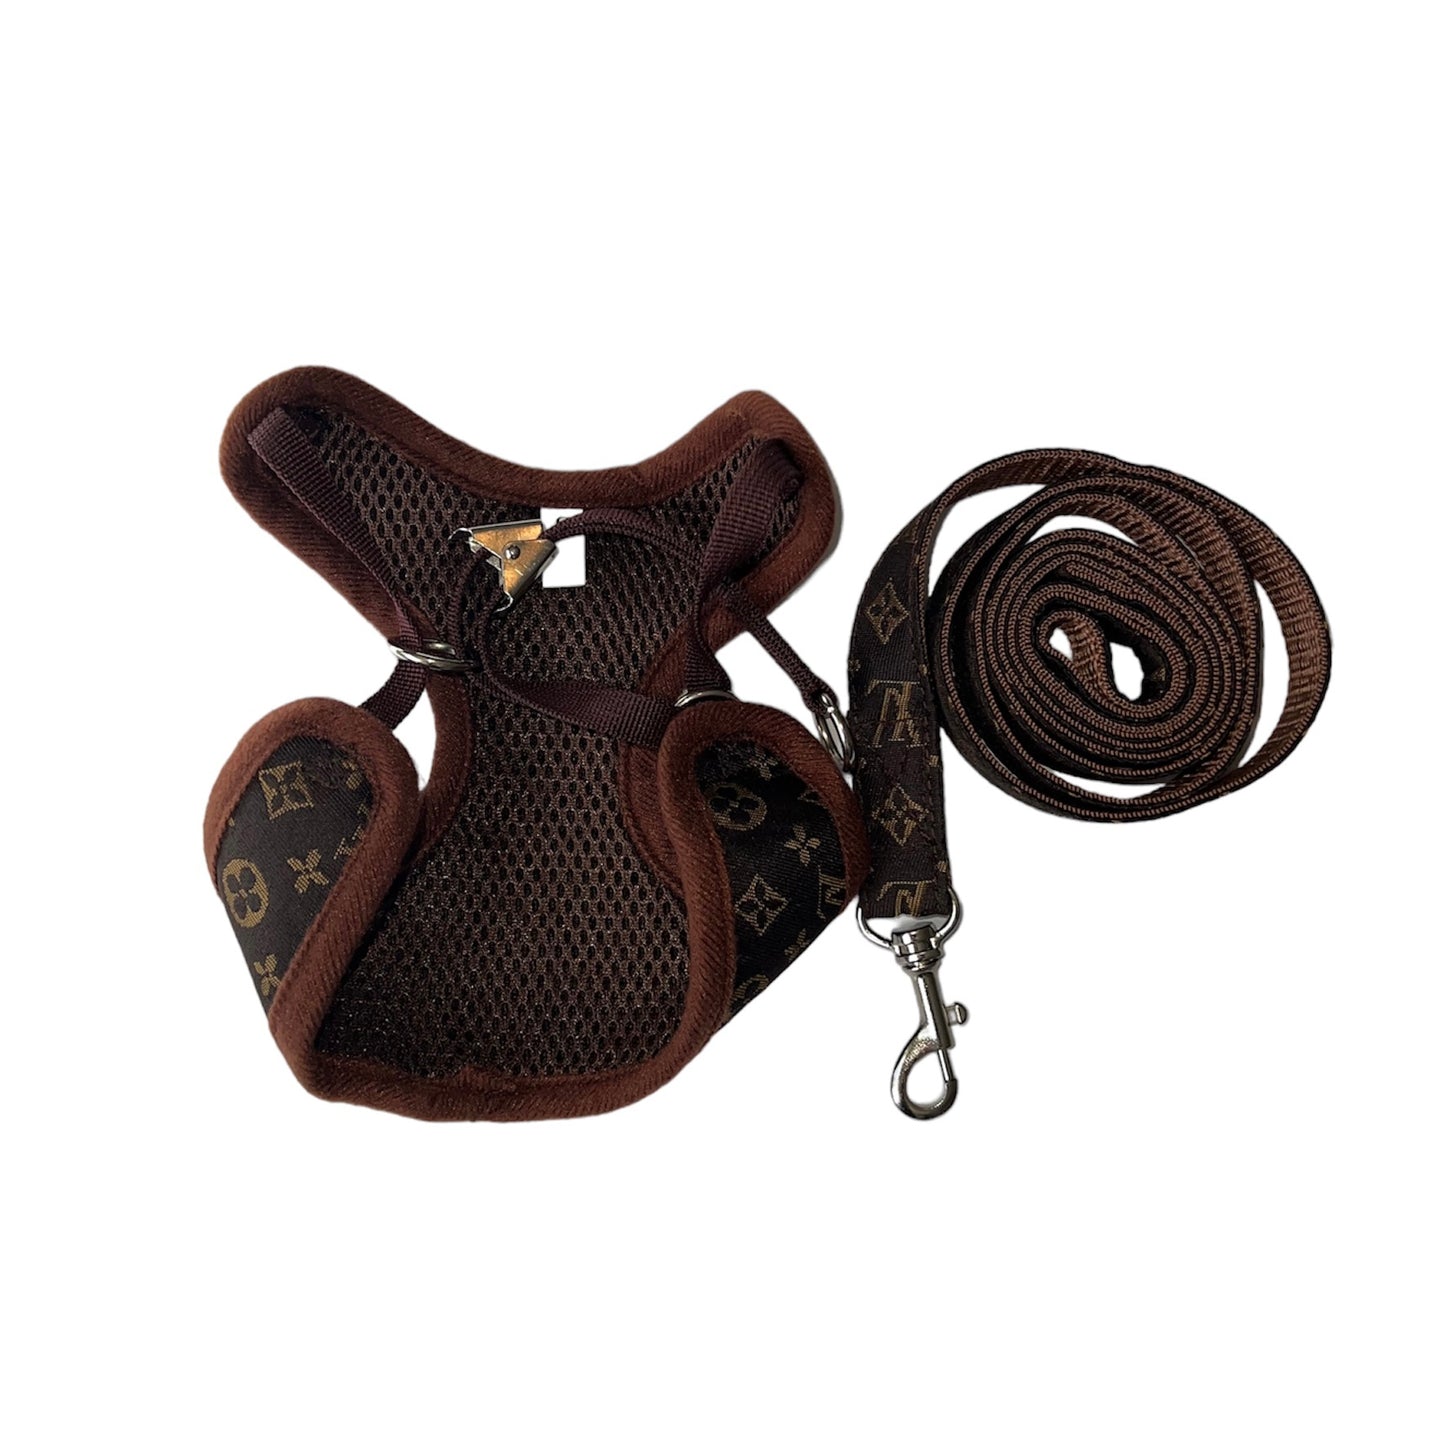 Paw Vuitton Leash and Harness set